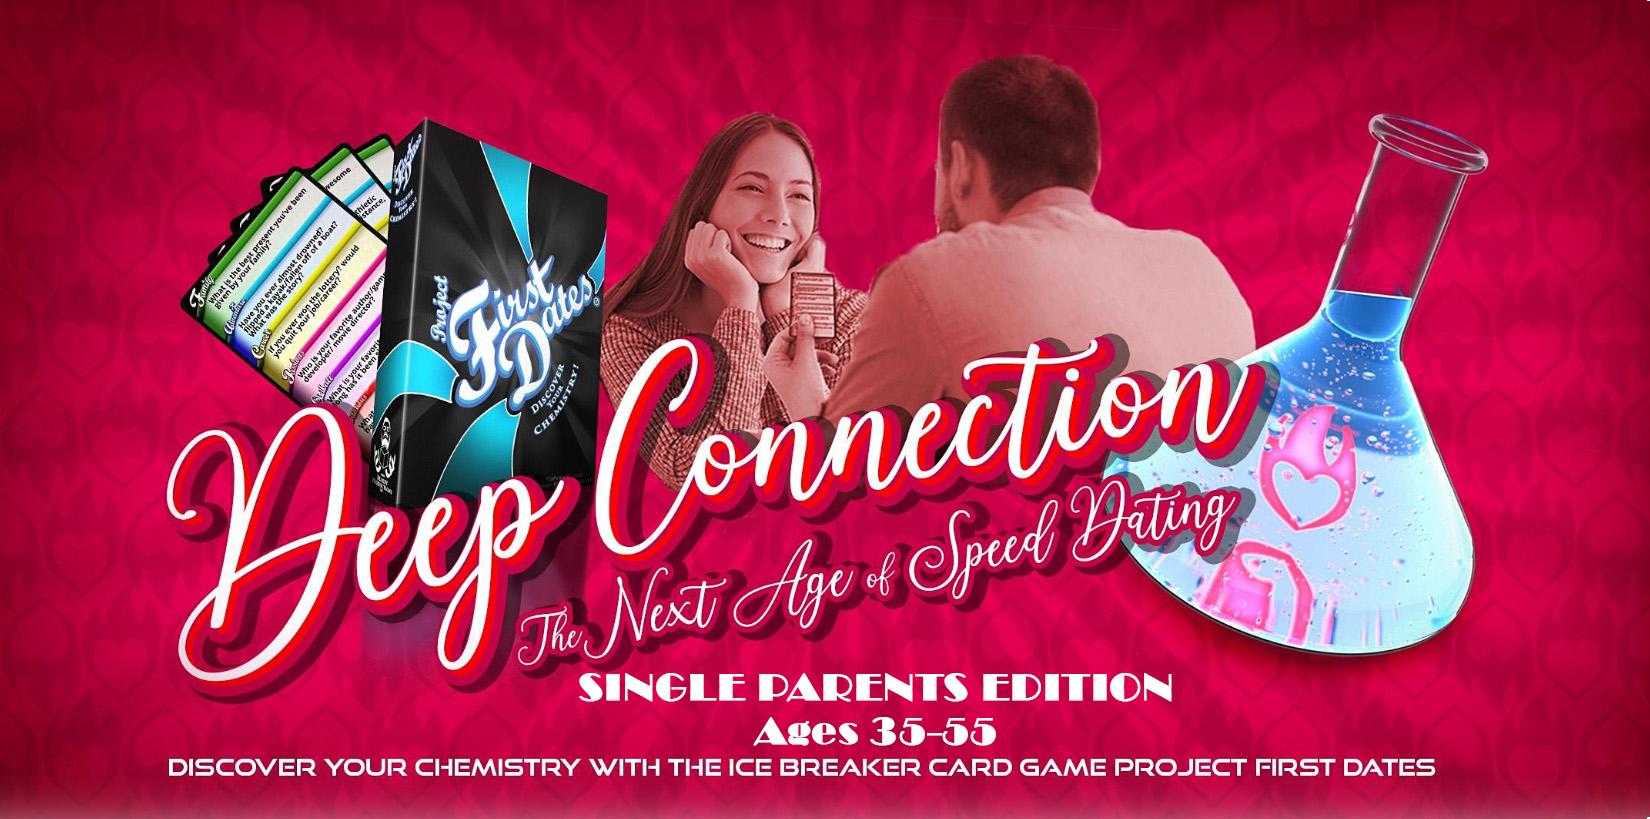 Deep Connection - The Next Age of Speed Dating - Singles Parents 35-55